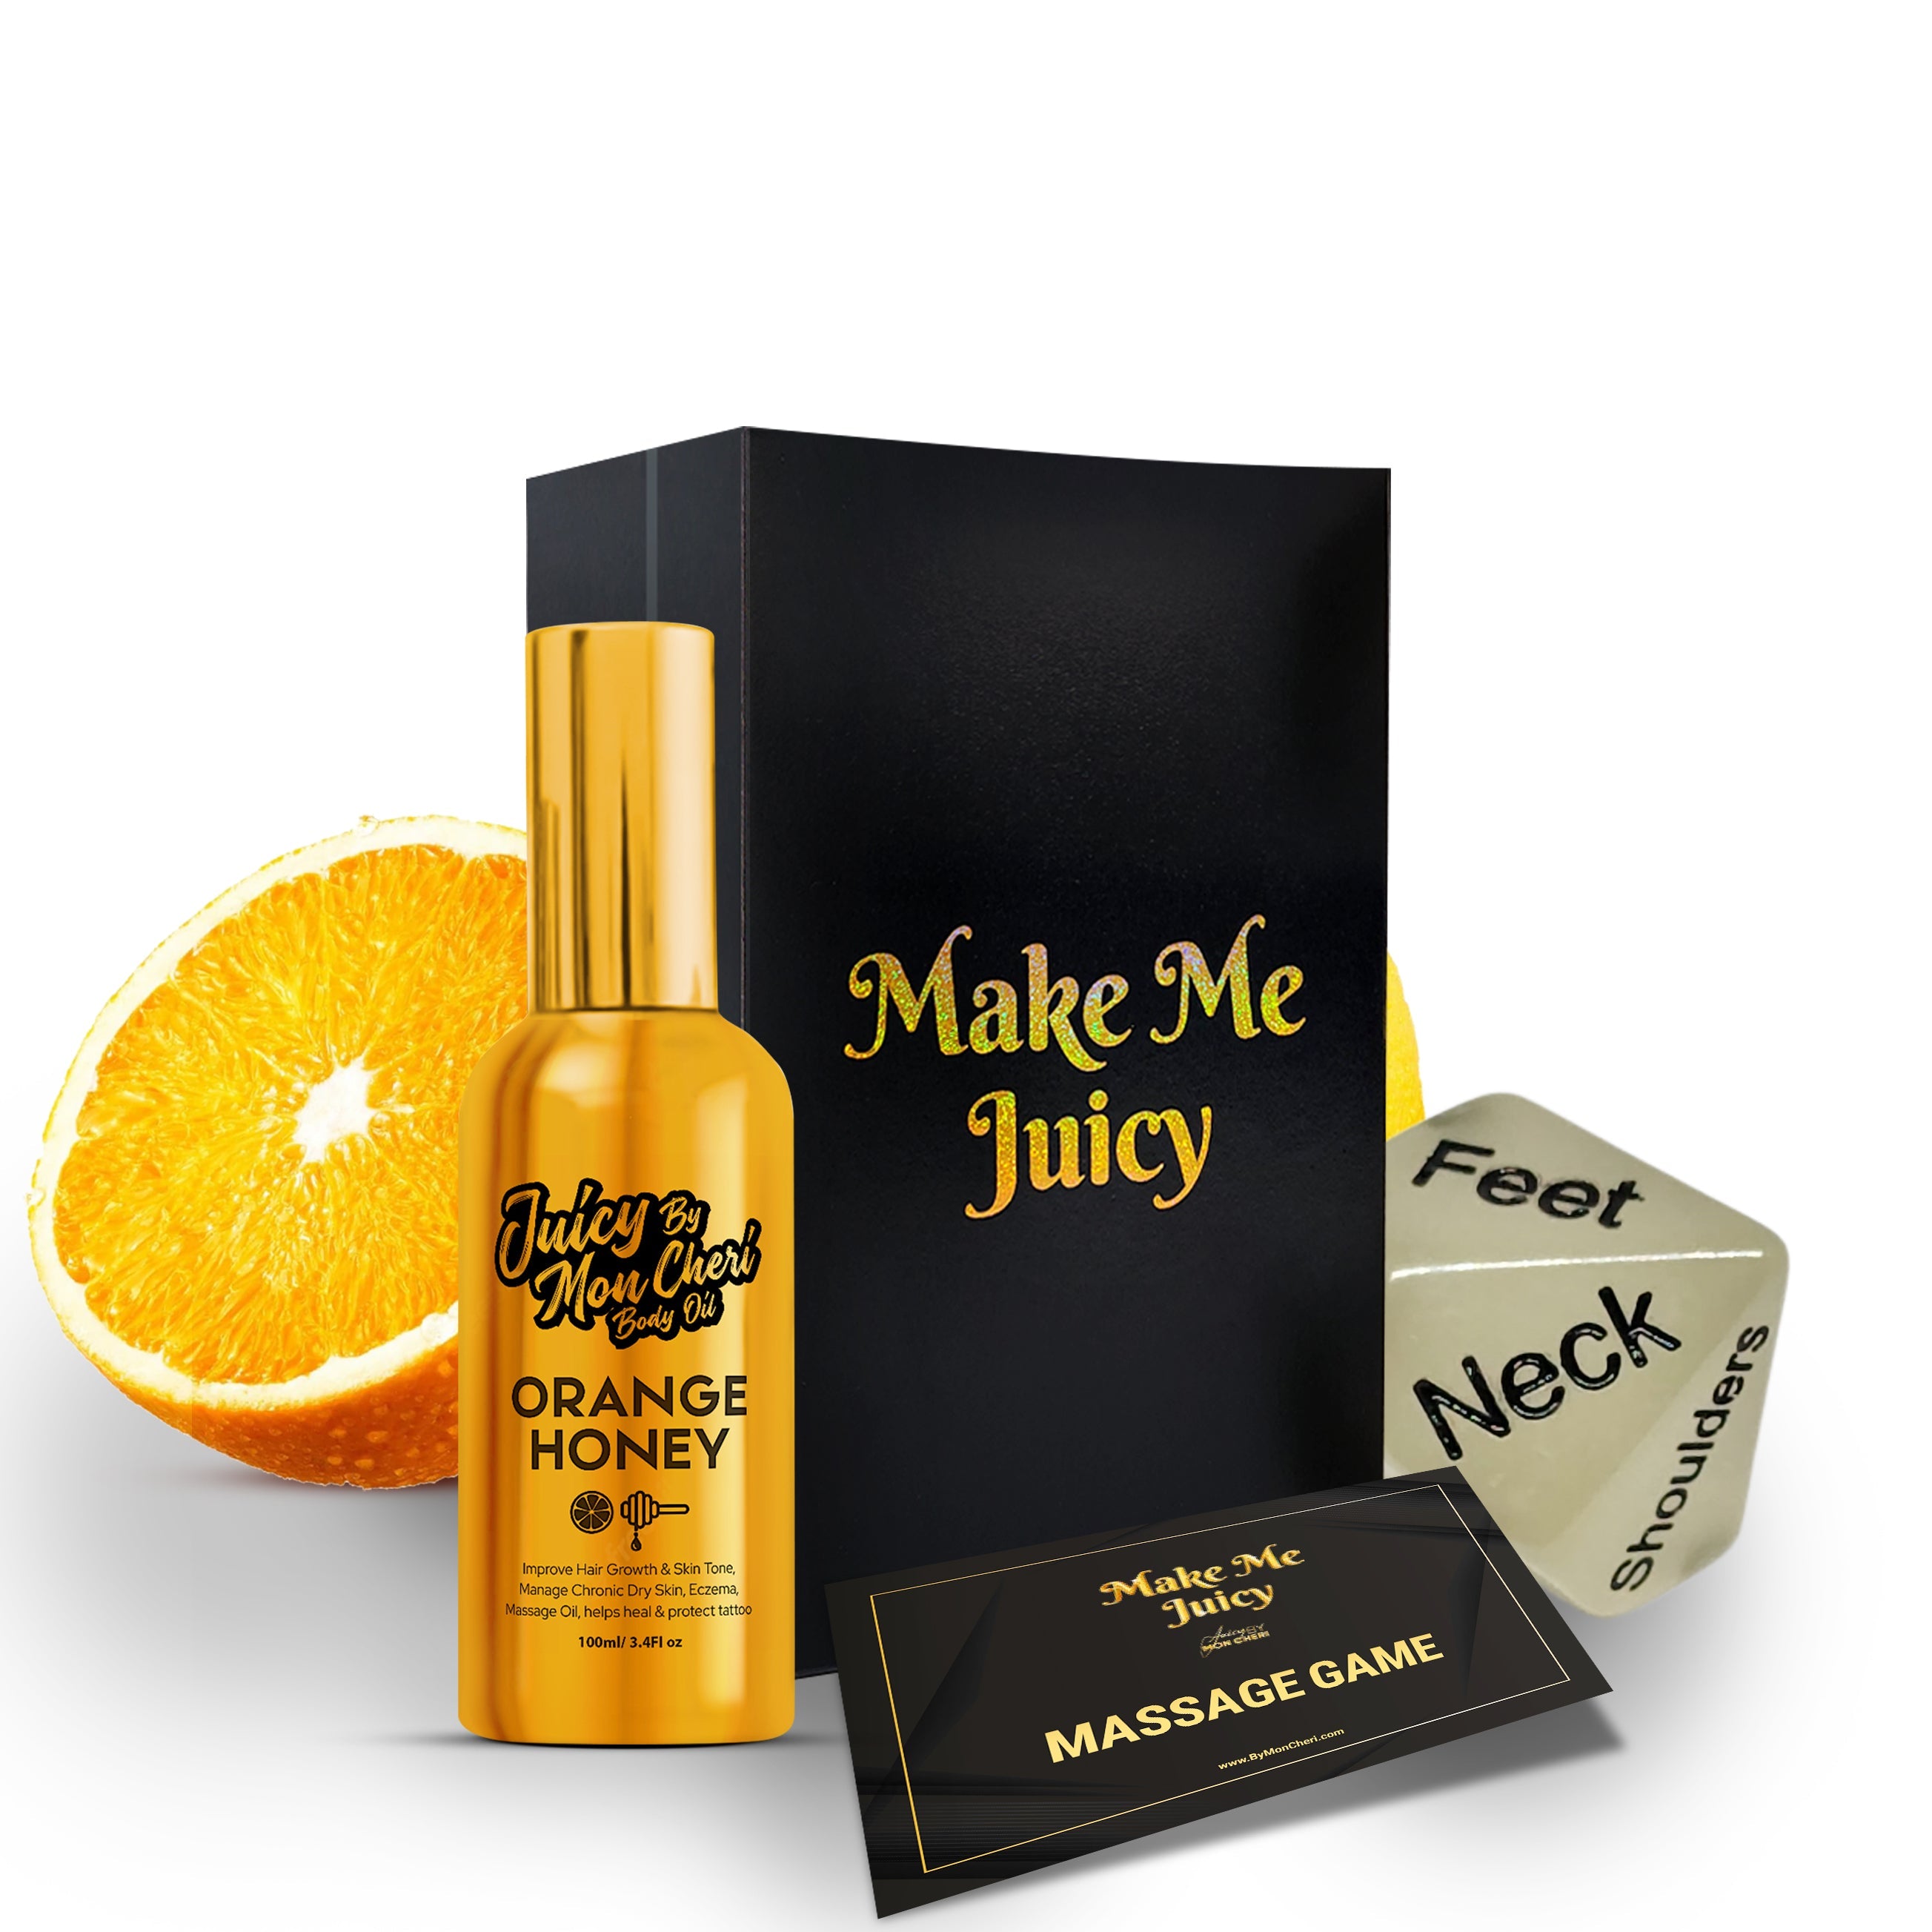 Unleash Intimate Fun with Juicy by Mon Cheri's Couples Massage Oil and Rolling Dice Game